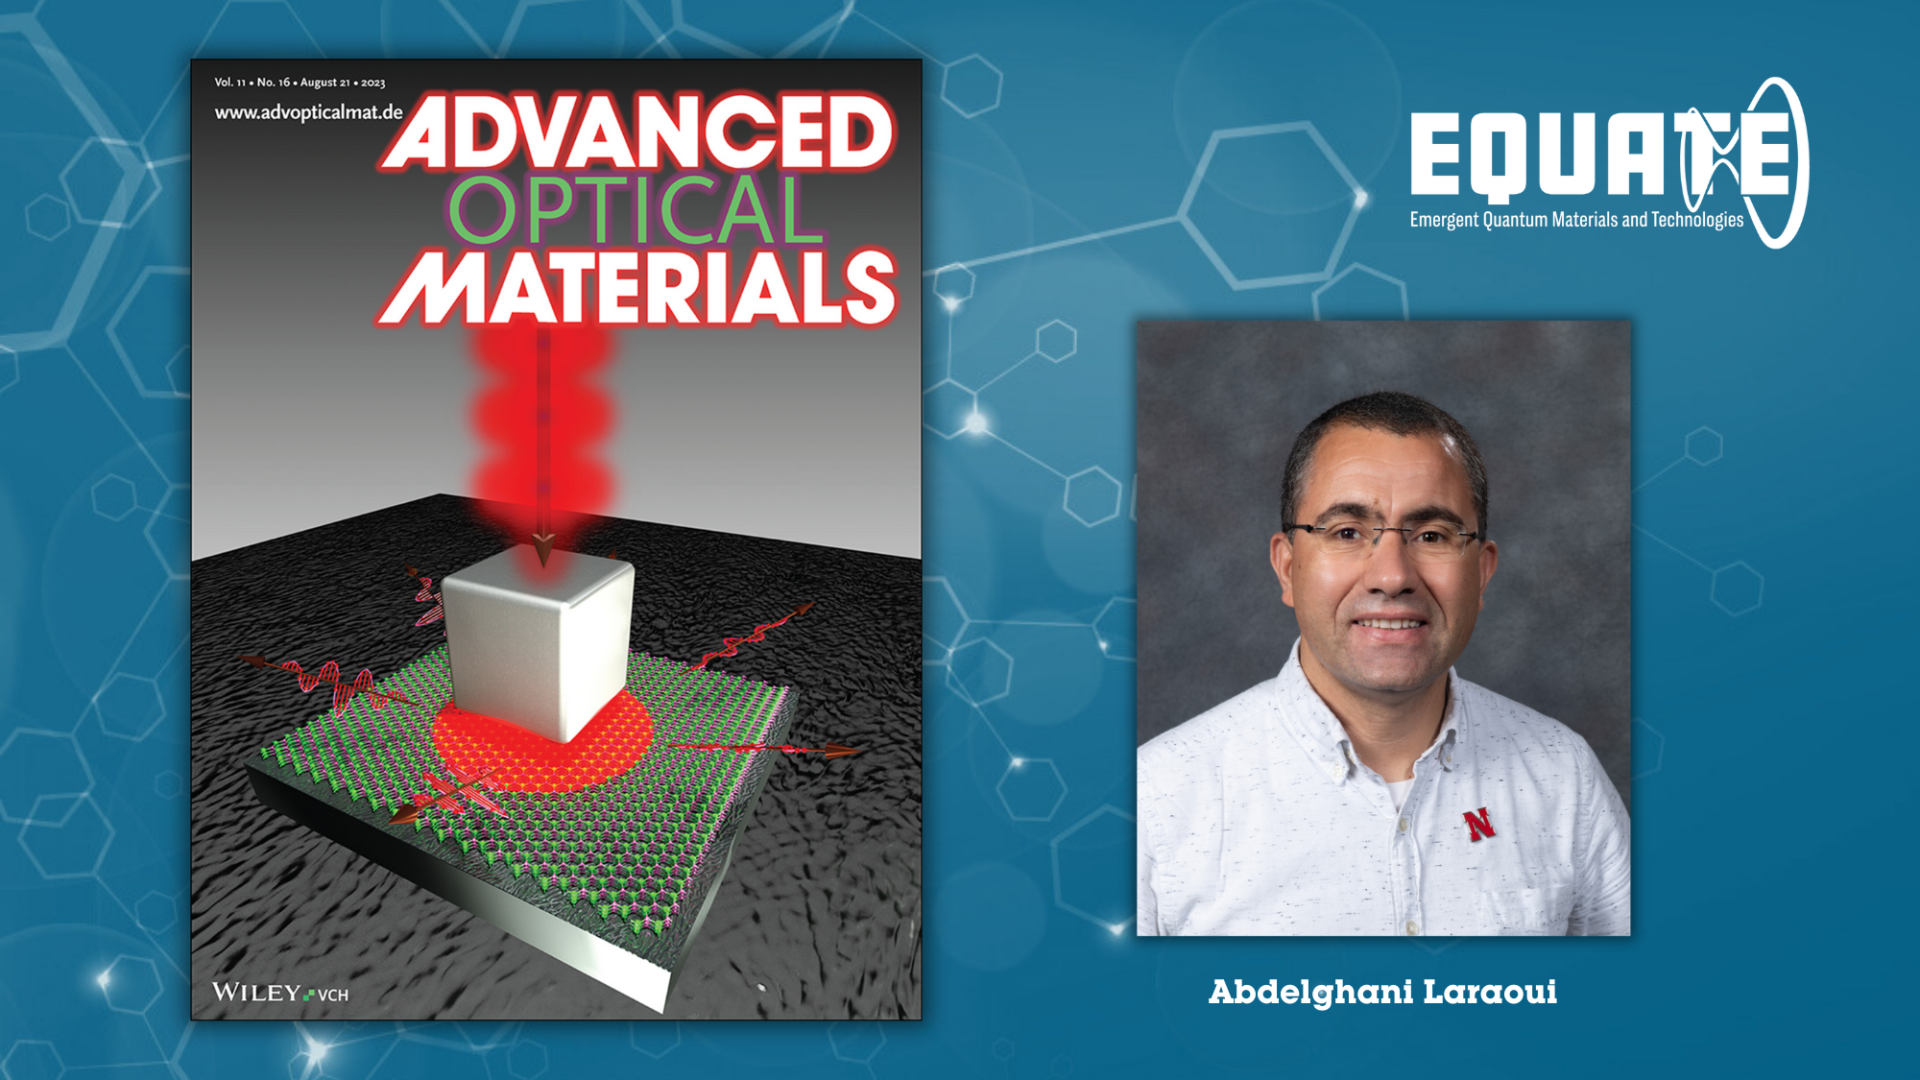 A copy of the back cover image from Advanced Optical Materials is on the right and a photo of the PI, Abdelghani Laraoui, is on the left.